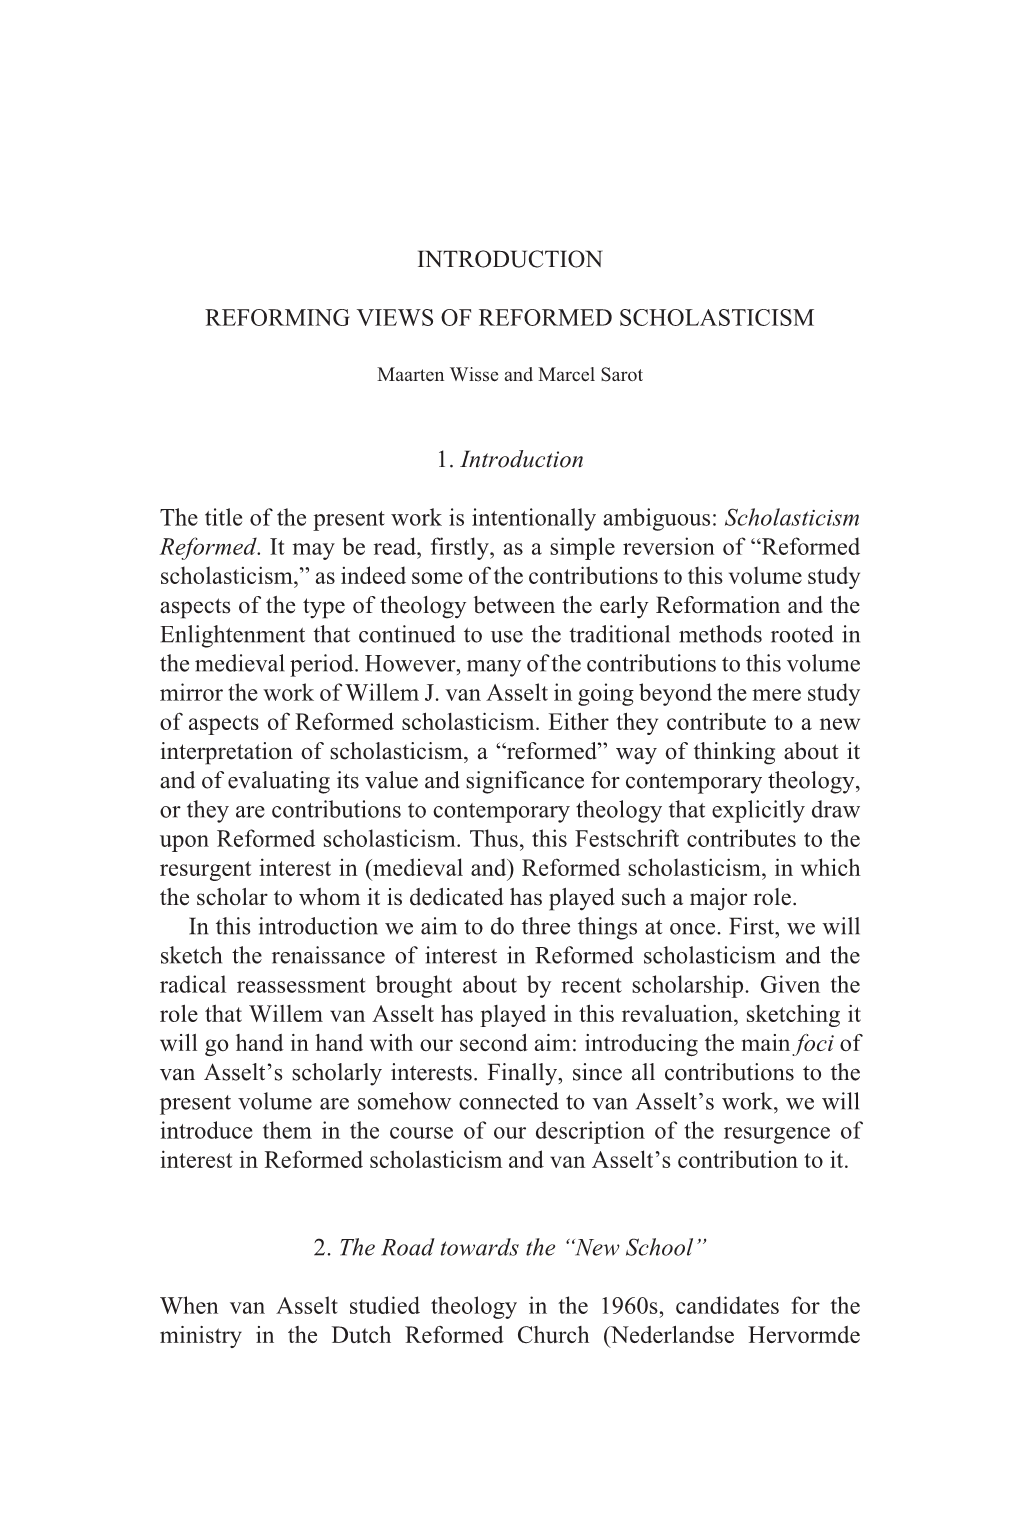 Introduction Reforming Views of Reformed Scholasticism